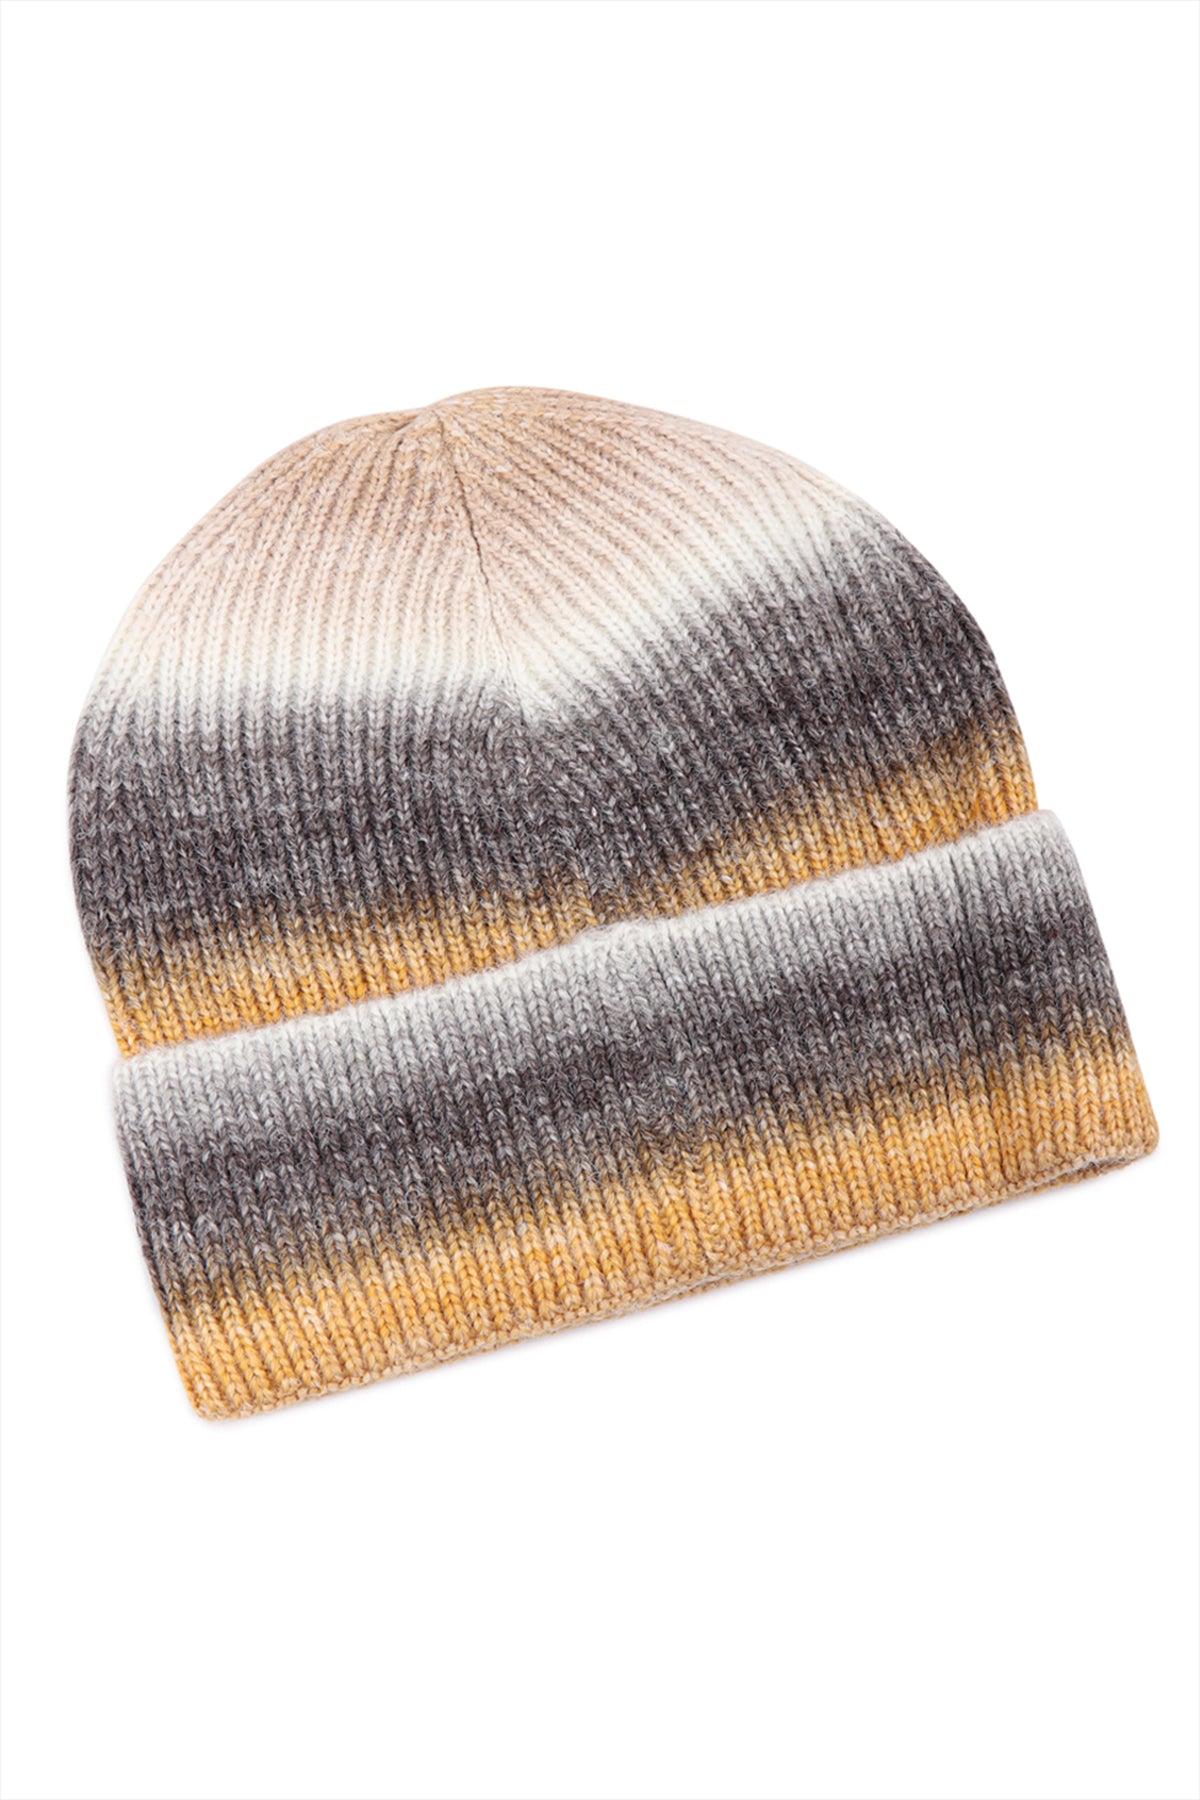 STRIPED KNITTED BEANIE/6PCS (NOW $2.50 ONLY!)